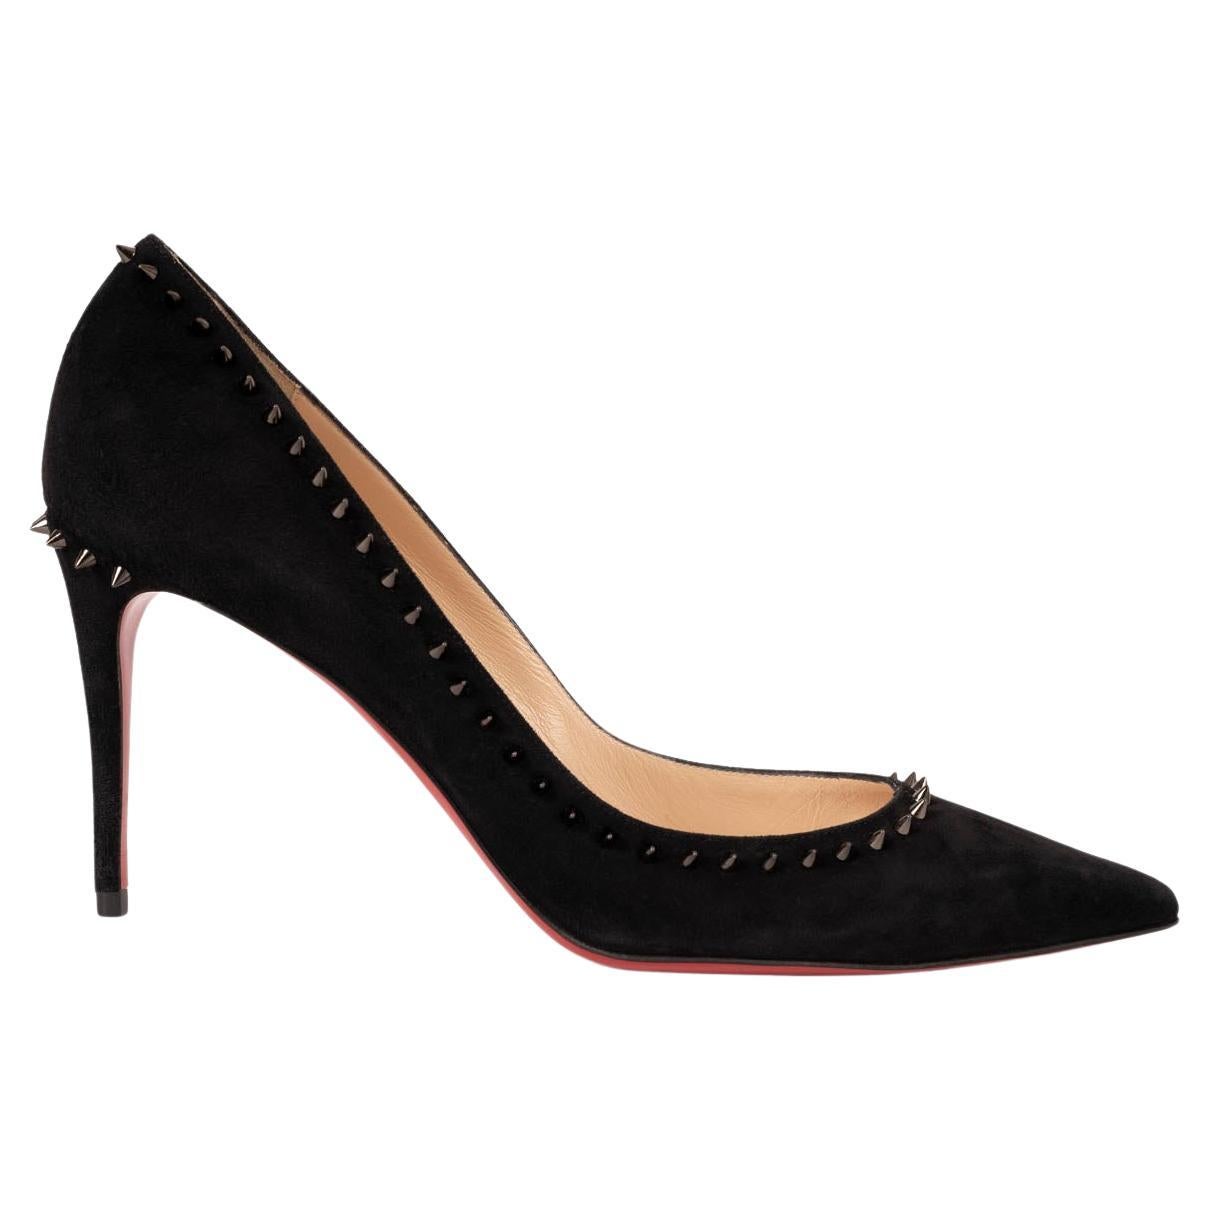 CHRISTIAN LOUBOUTIN black suede ANJALINA 85 Pumps Shoes 39.5 For Sale